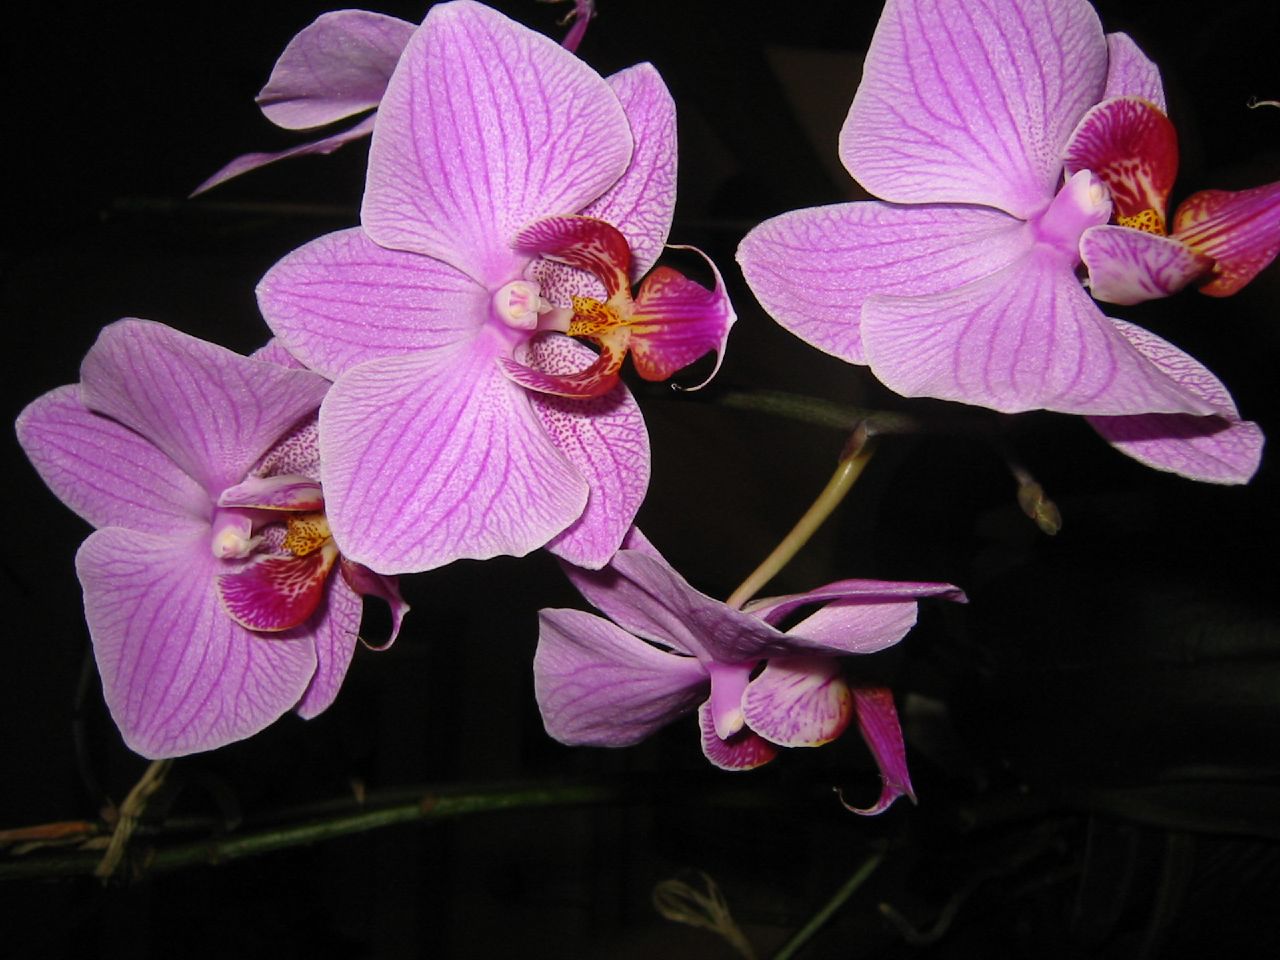 the orchids are blooming brightly and very vivid